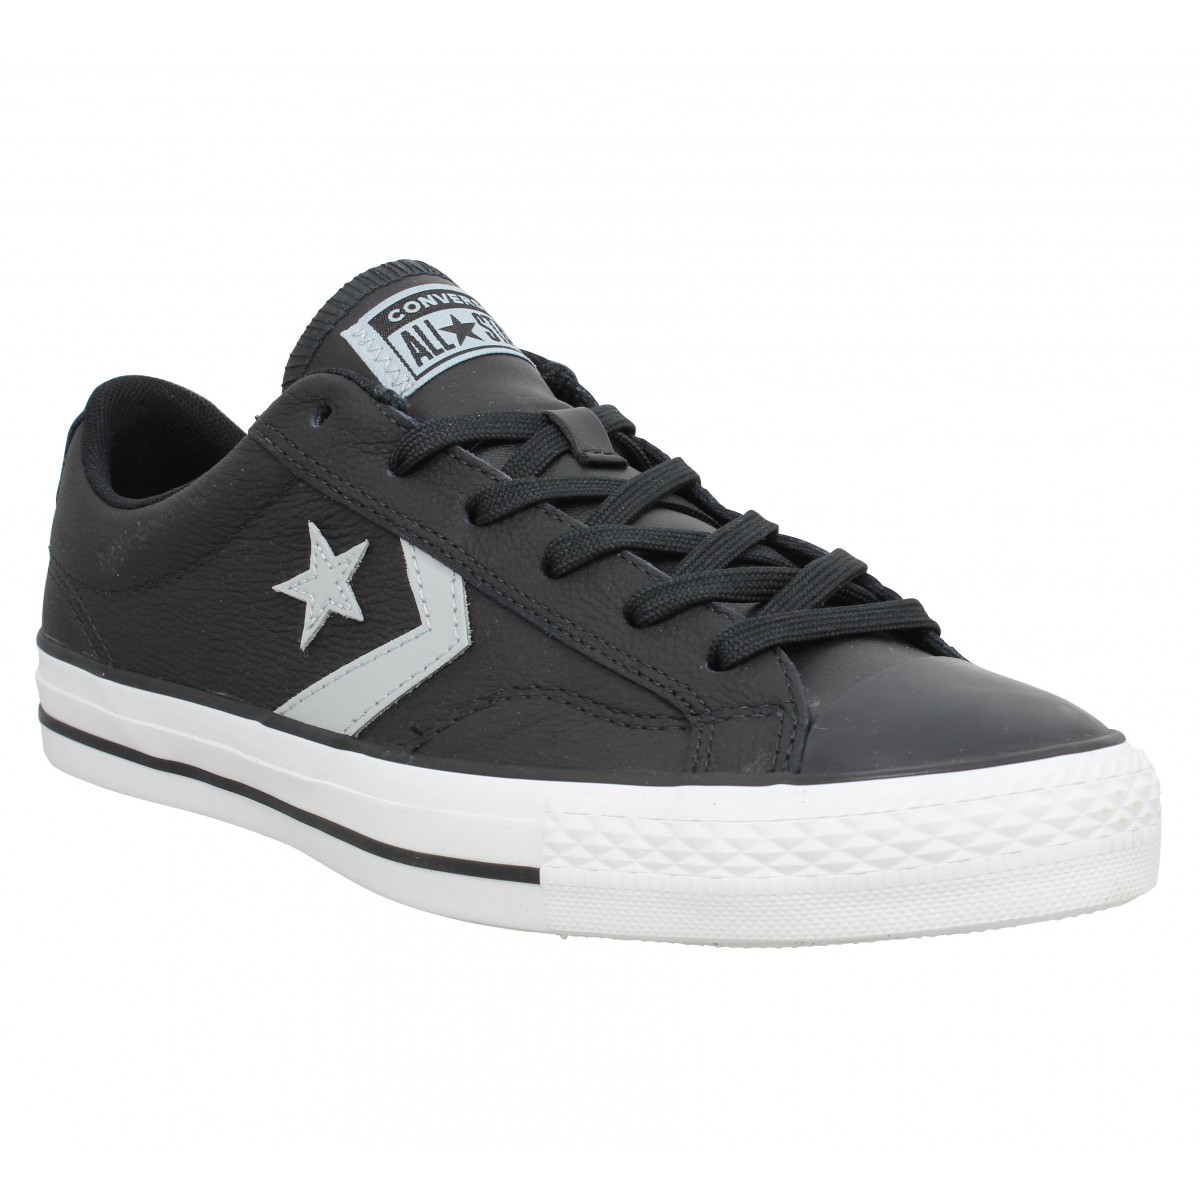 chaussures converse hommes